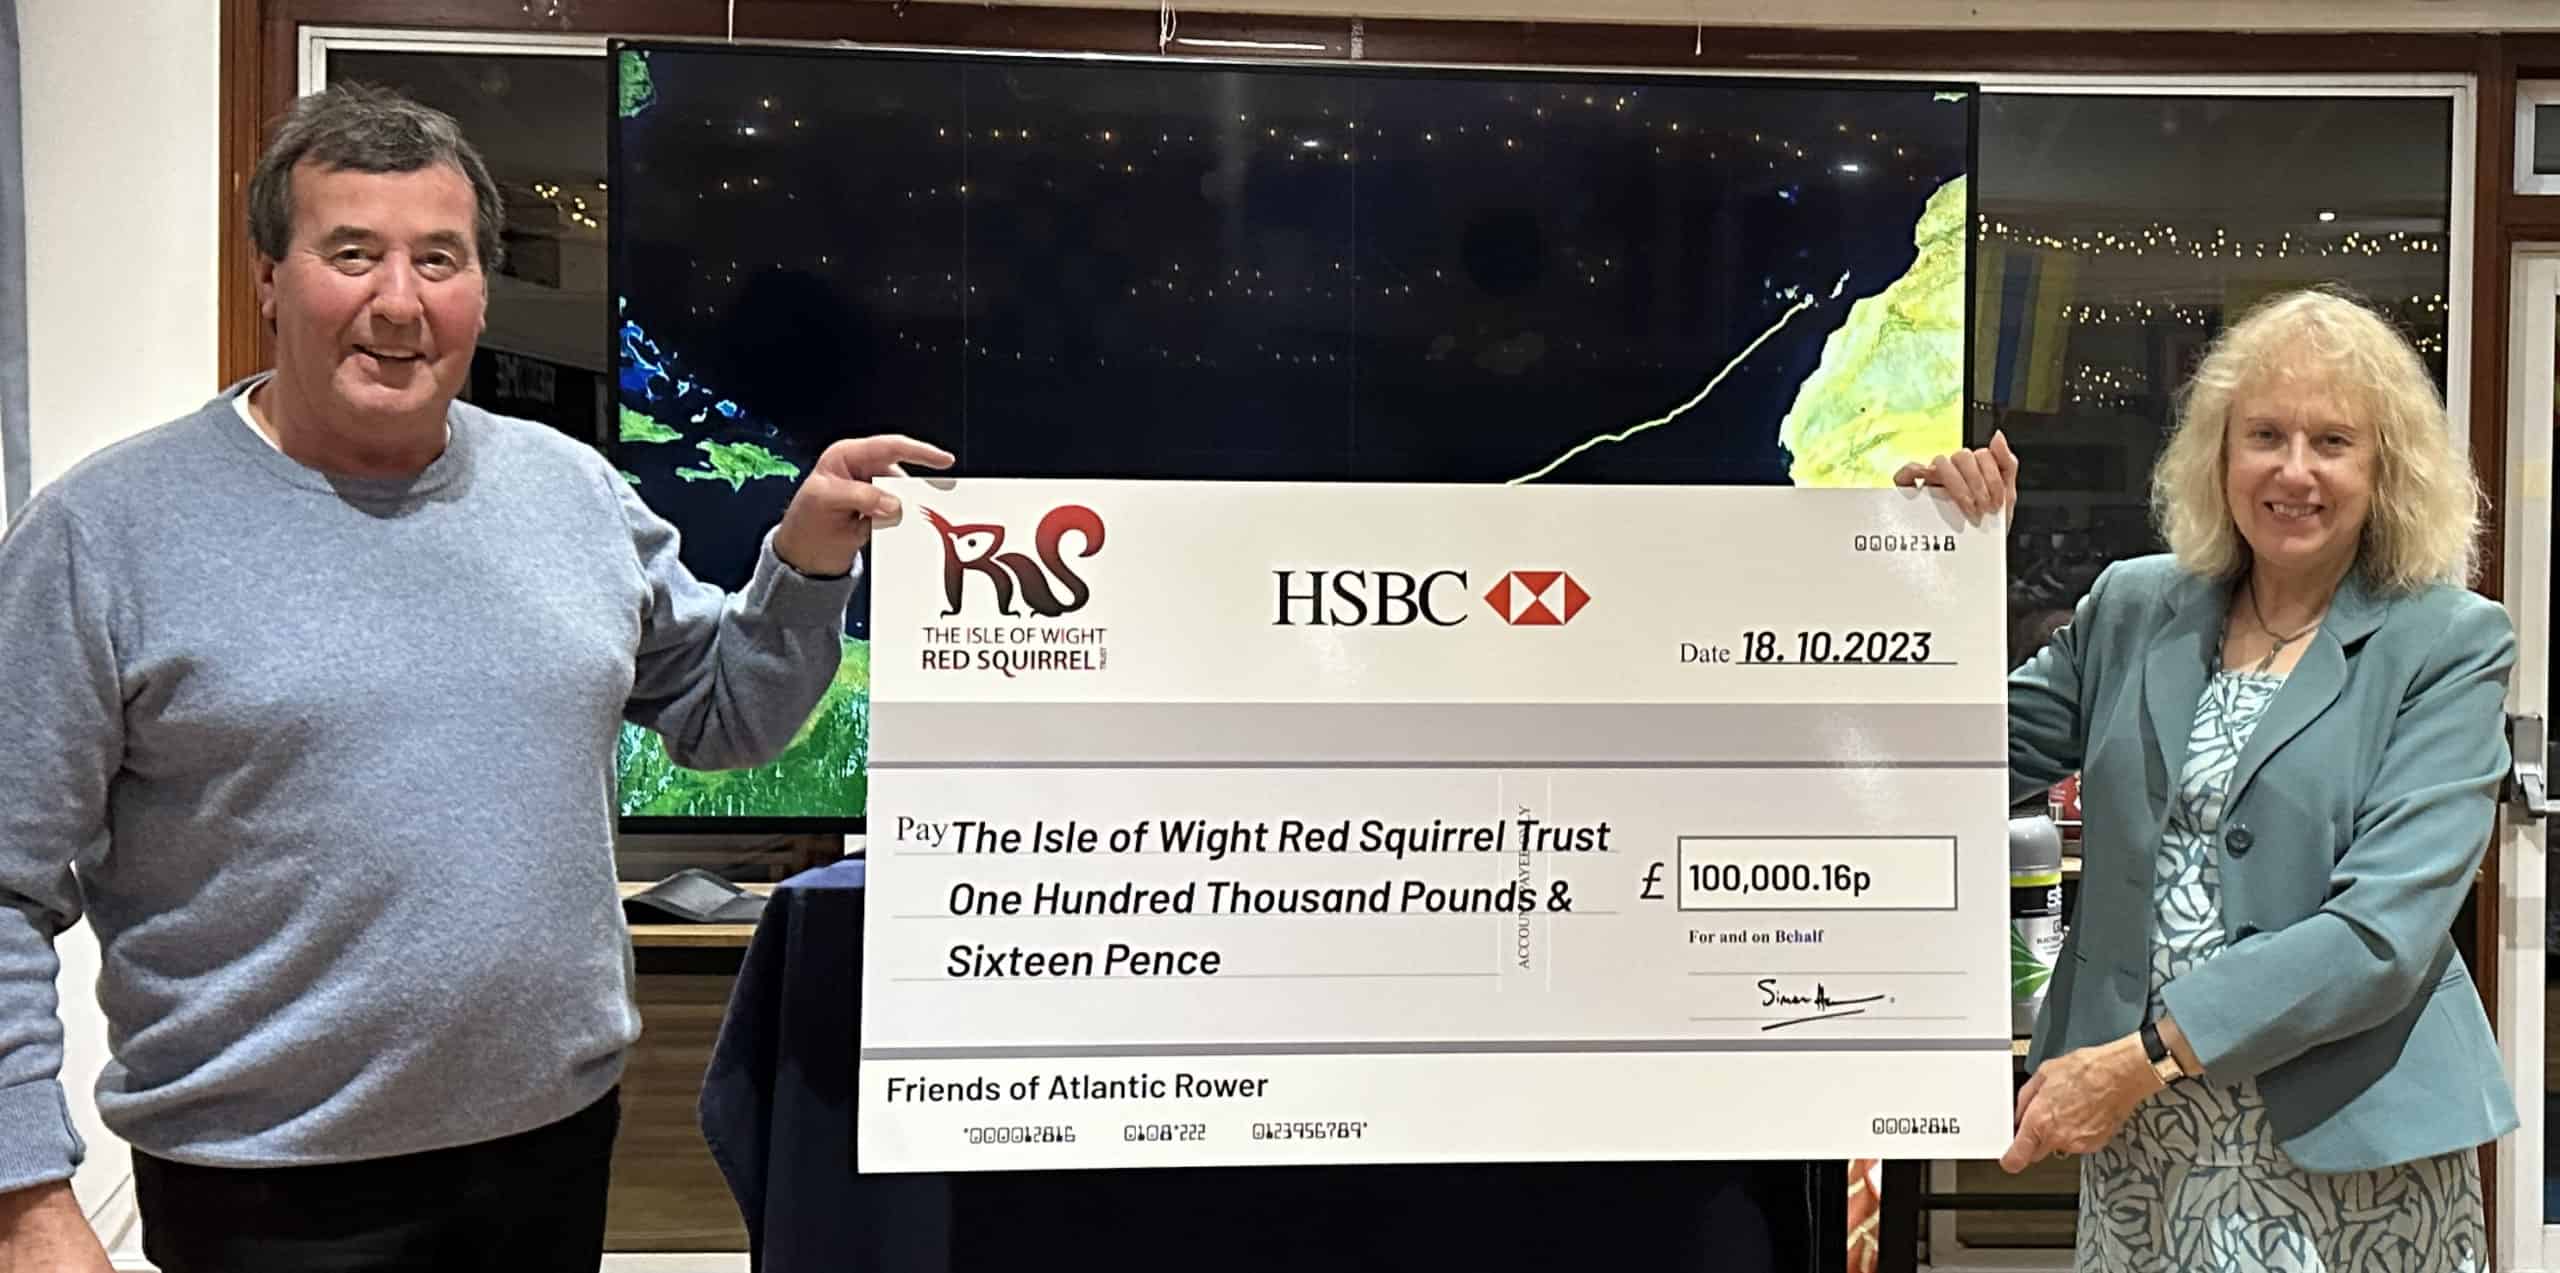 Atlantic Rower presenting a cheque for £100,000.16p to The Chair of the Isle of Wight Red Squirrel Trust